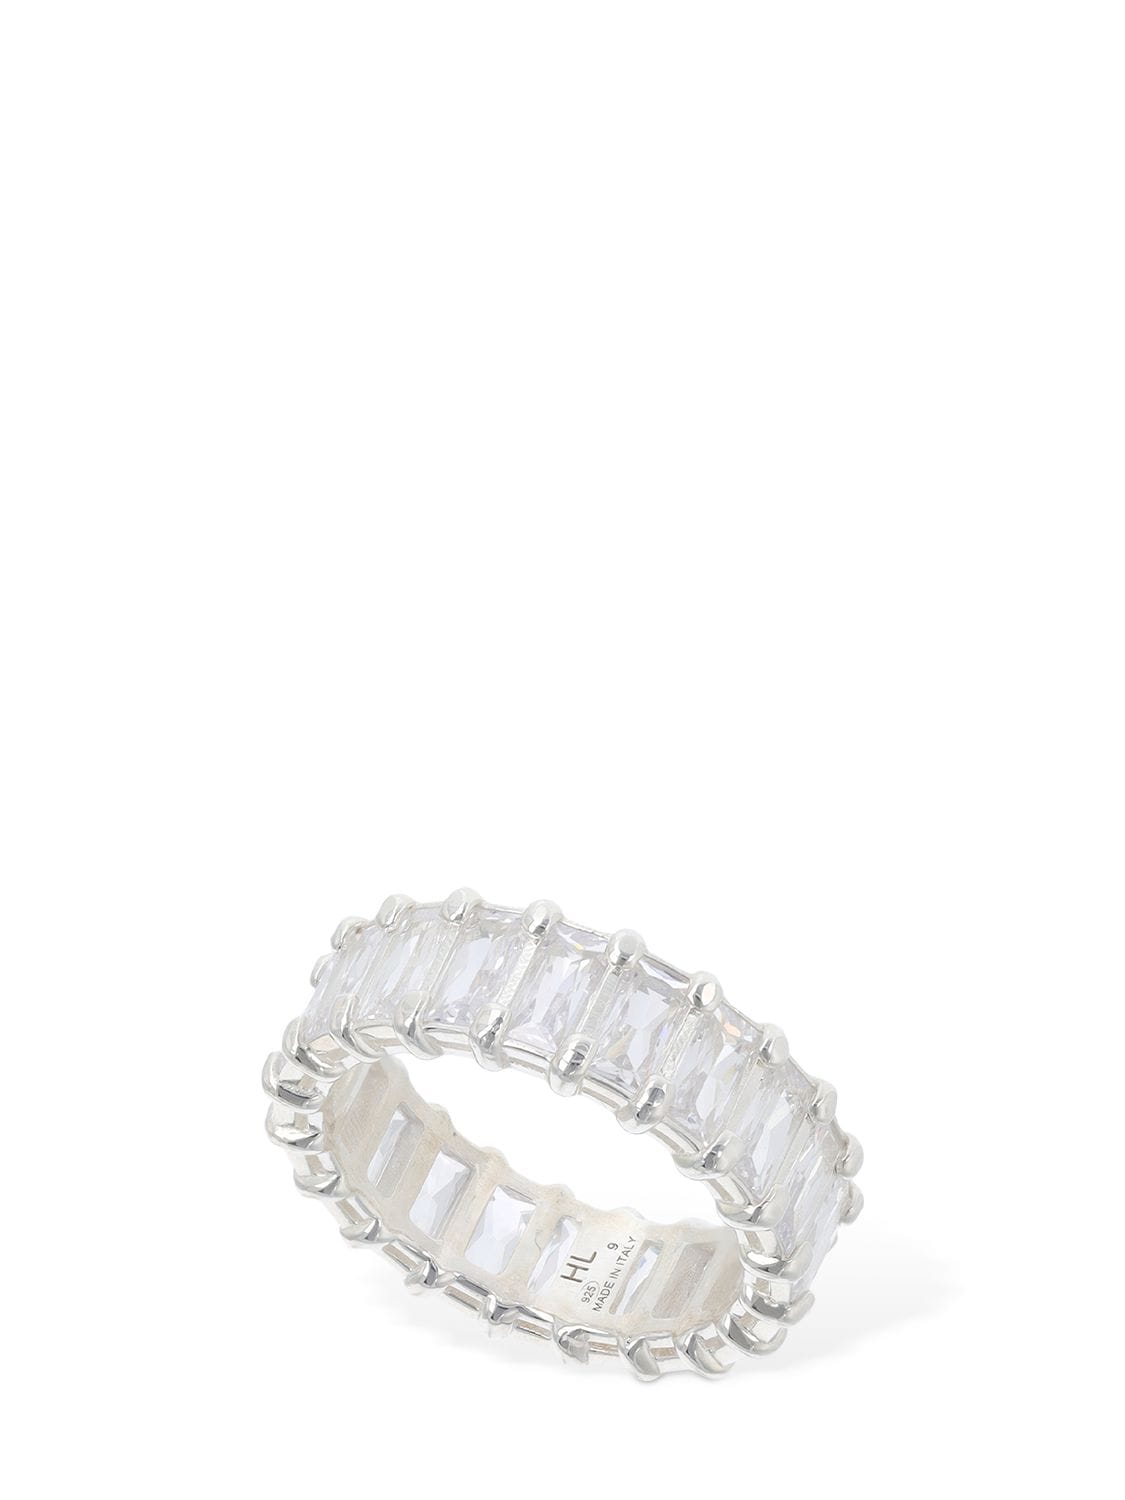 HATTON LABS WHITE BAGUETTE ETERNITY RING